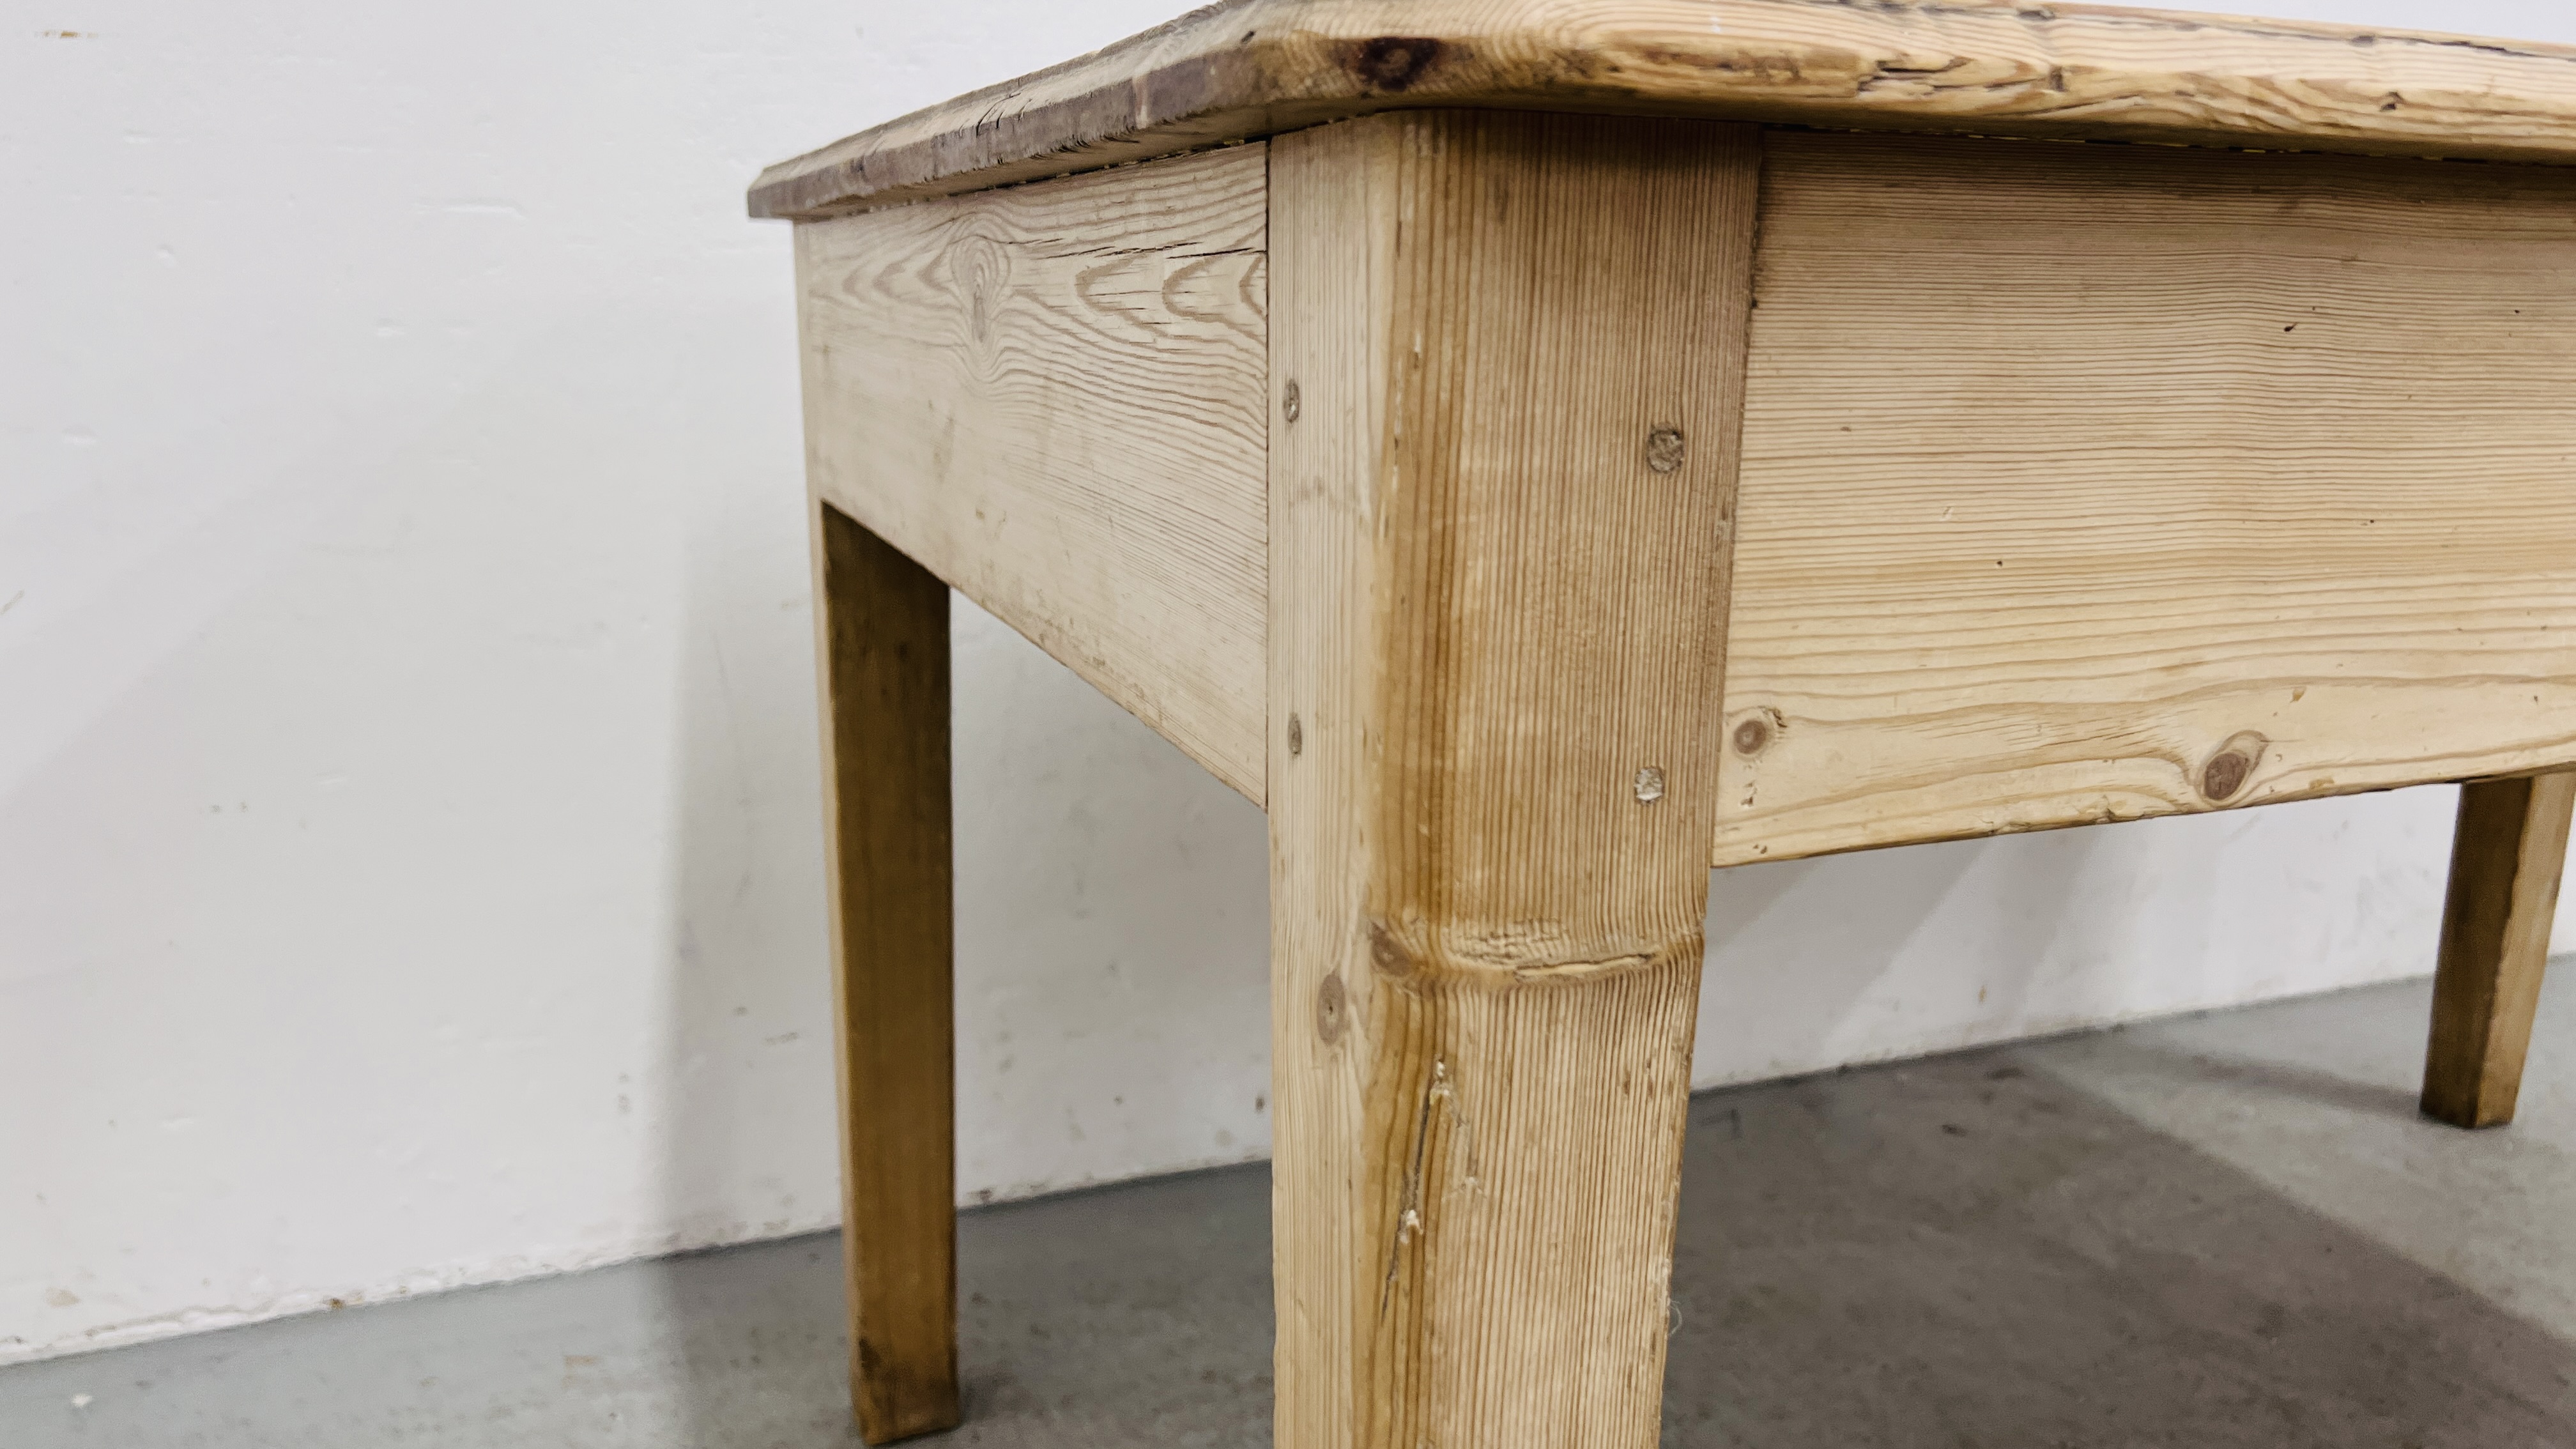 ANTIQUE WAXED PINE FARMHOUSE KITCHEN TABLE WIDTH 152CM. DEPTH 90CM. HEIGHT 77CM. - Image 7 of 11